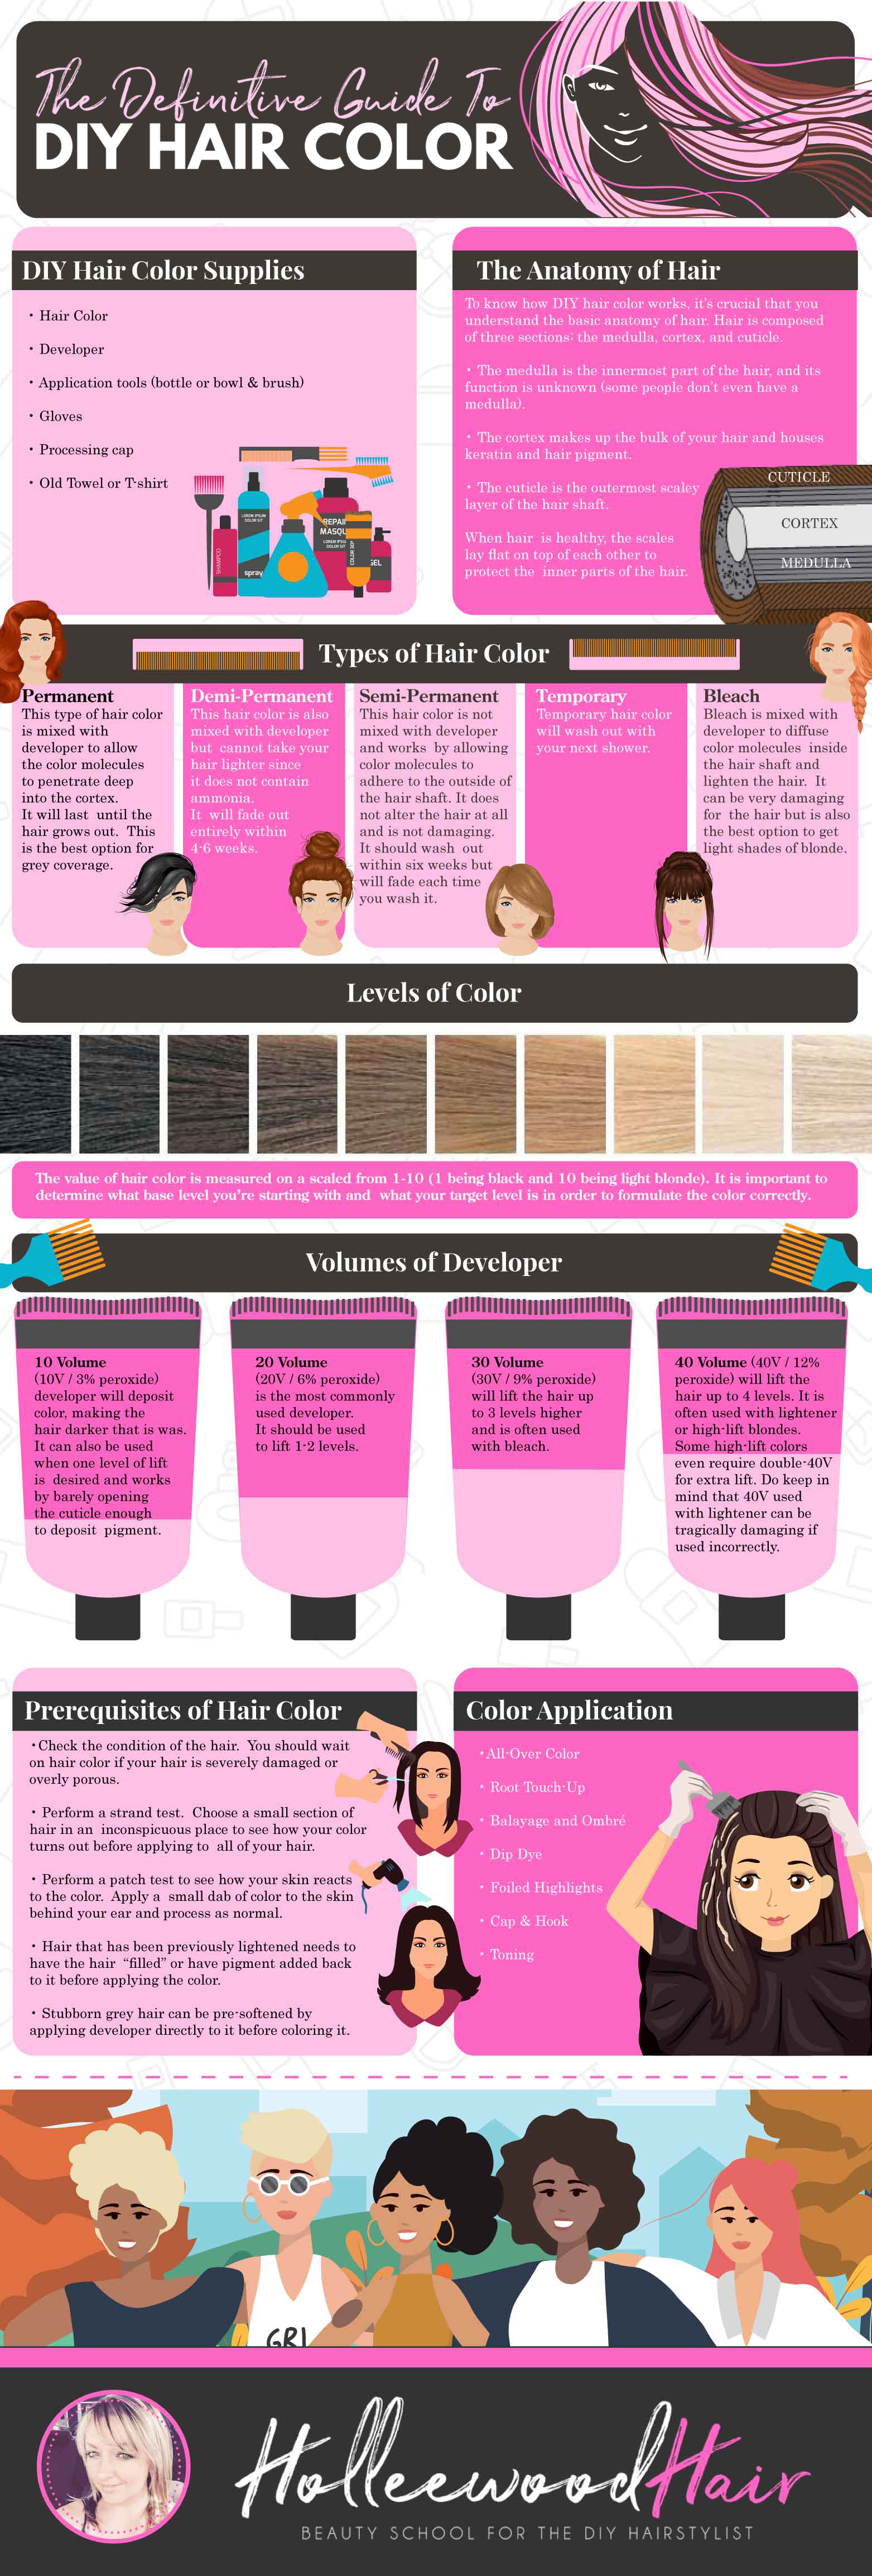 DIY Hair Color: A Comprehensive Guide to Home Coloring - Infographic